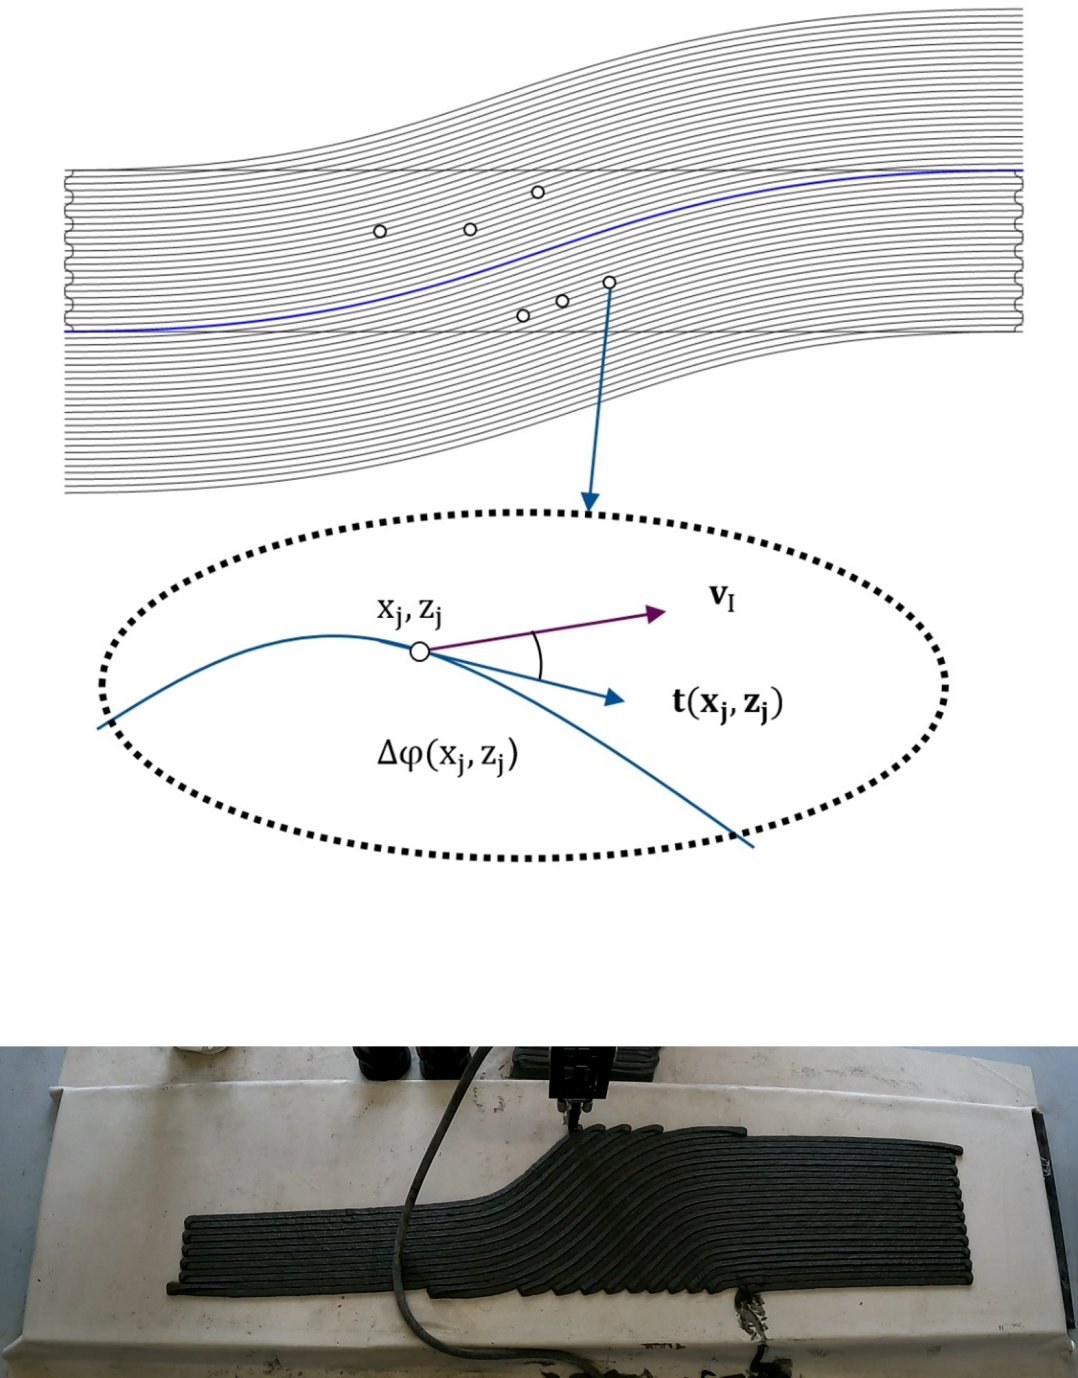 Figure 3: Illustration of printing path planning algorithm (top) and associated print (bottom)